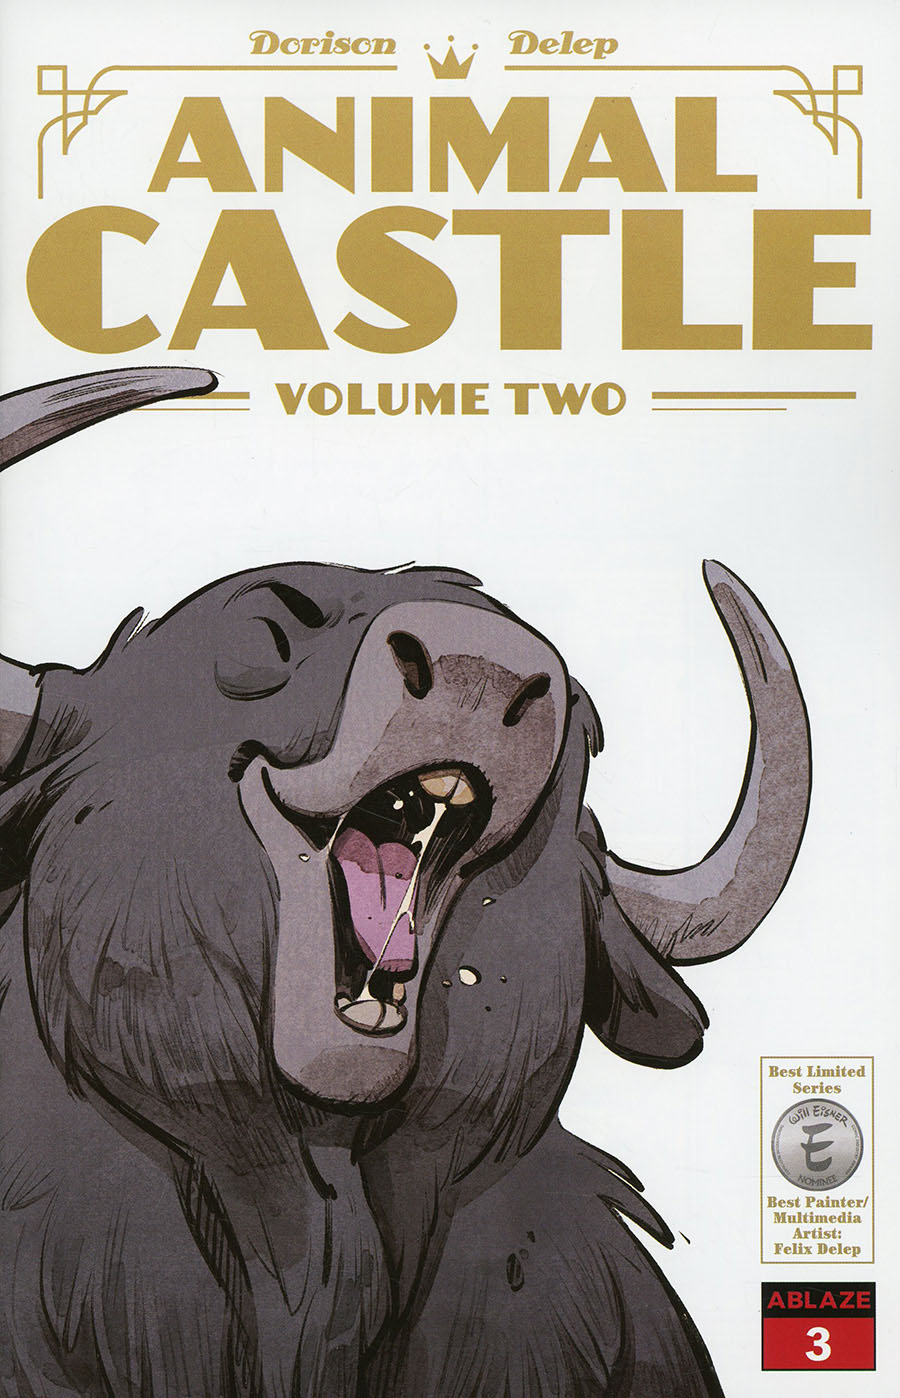 Animal Castle Vol 2 #3 Cover B Variant Felix Delep Laughing Silvio Cover